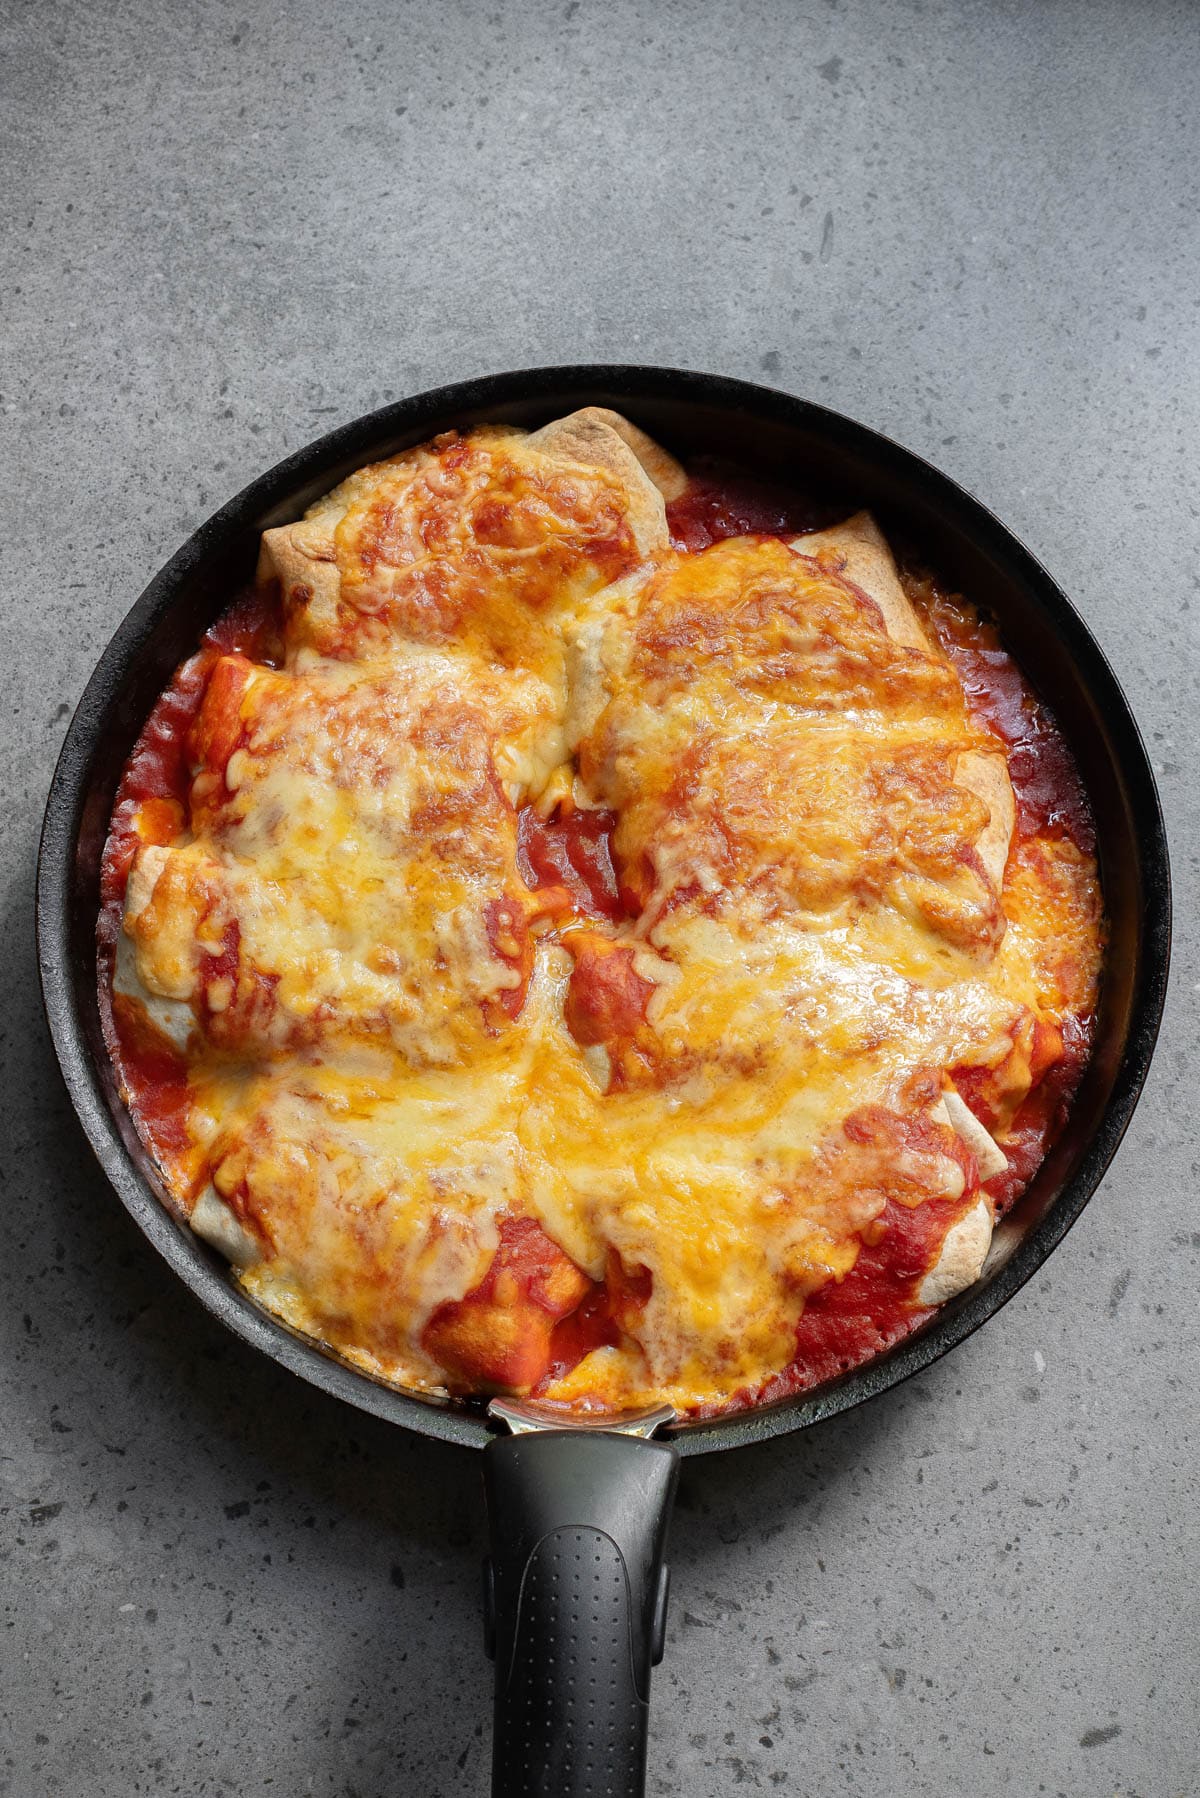 Fold the baked tortillas, cover with sauce and melted cheese, and place in a cast iron skillet.